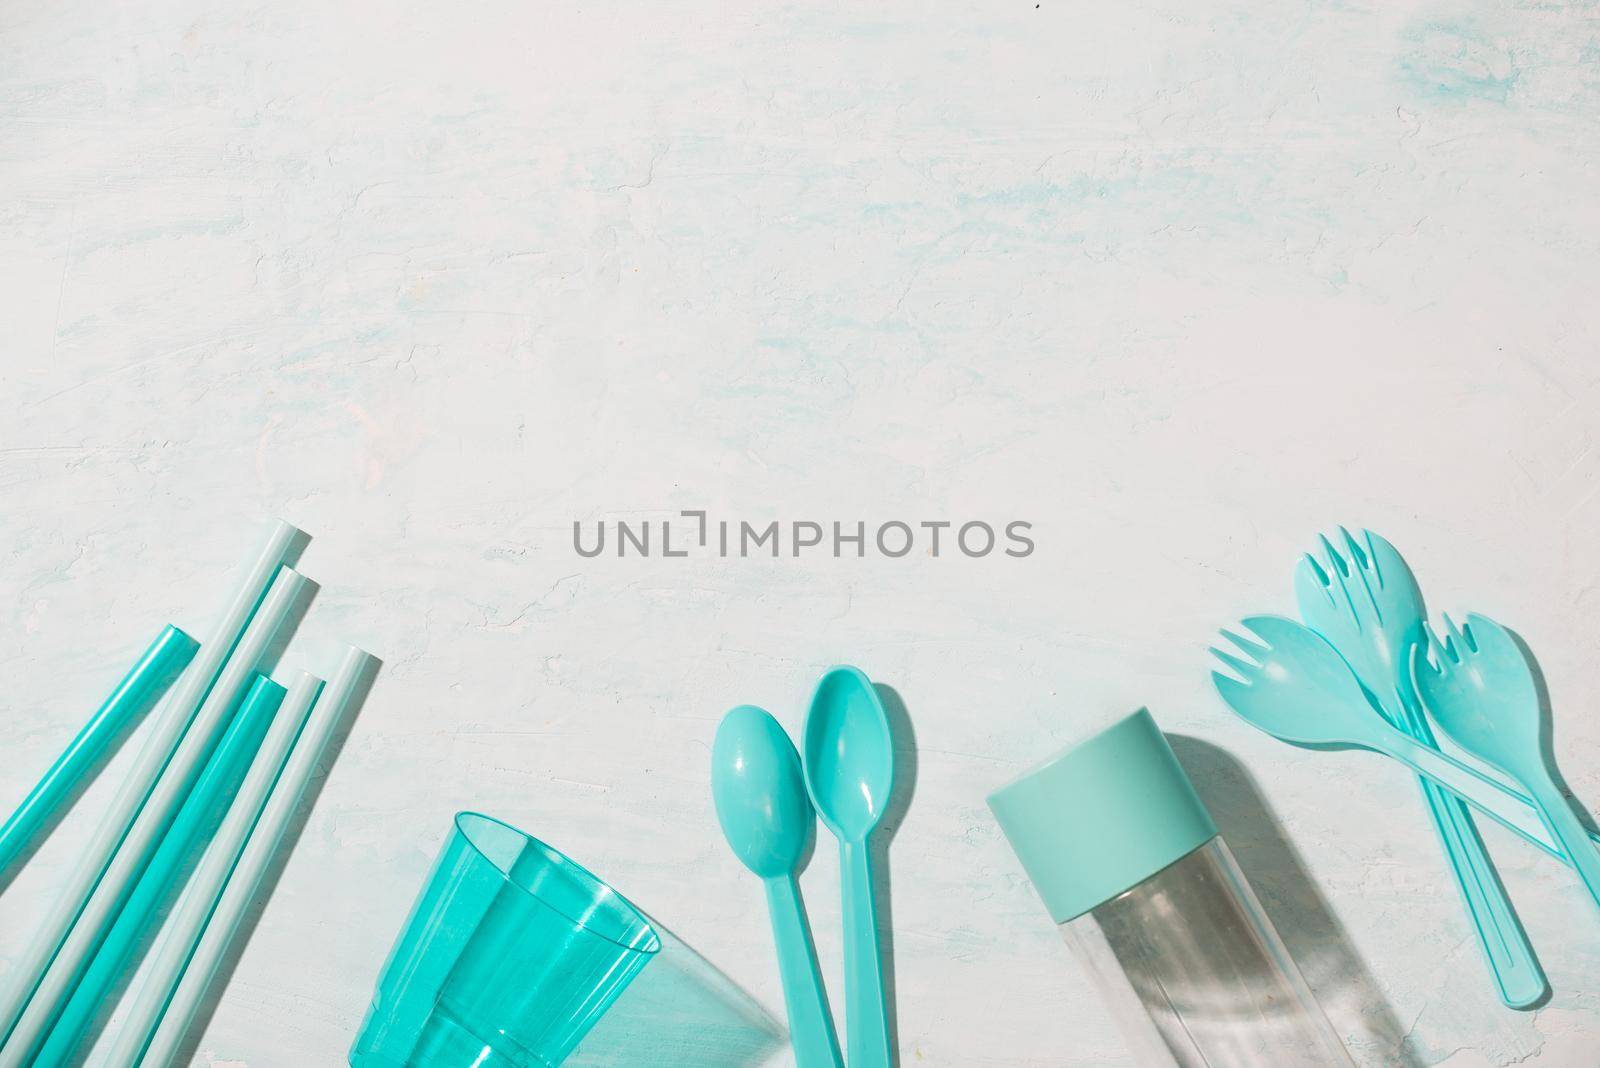 No plastic recycle concept blue plastic dishes plates cups spoon isolated white background, copy space, top view by makidotvn